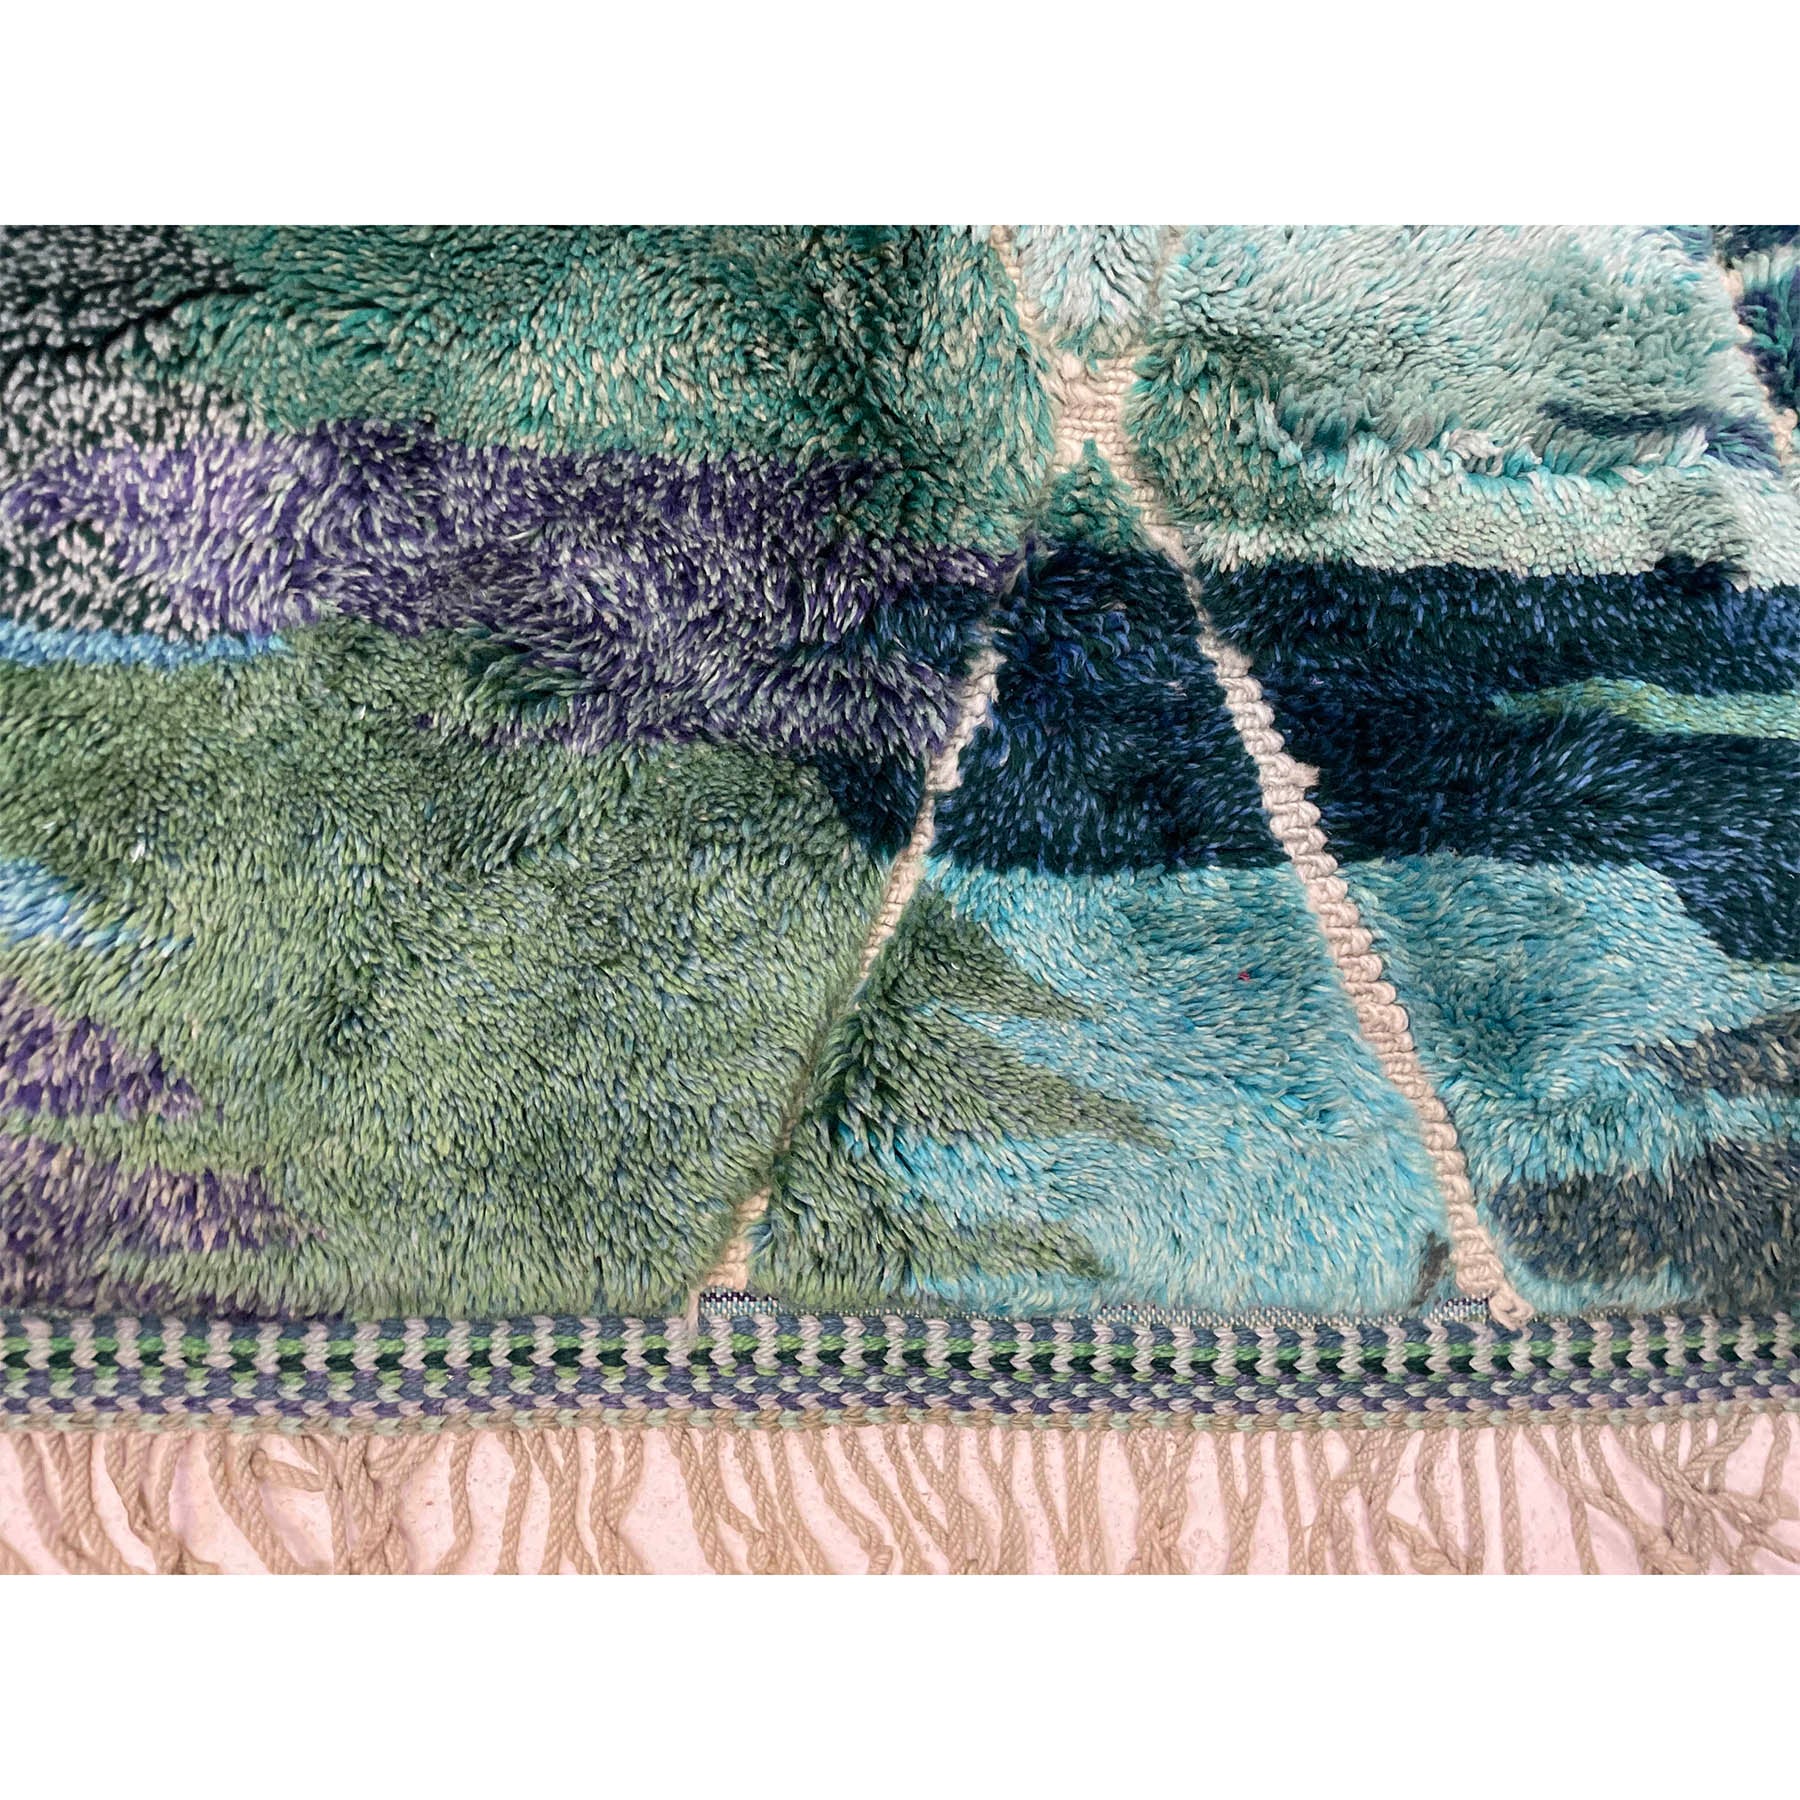 Handknotted wool Moroccan rug in greens and blues - Kantara | Moroccan Rugs